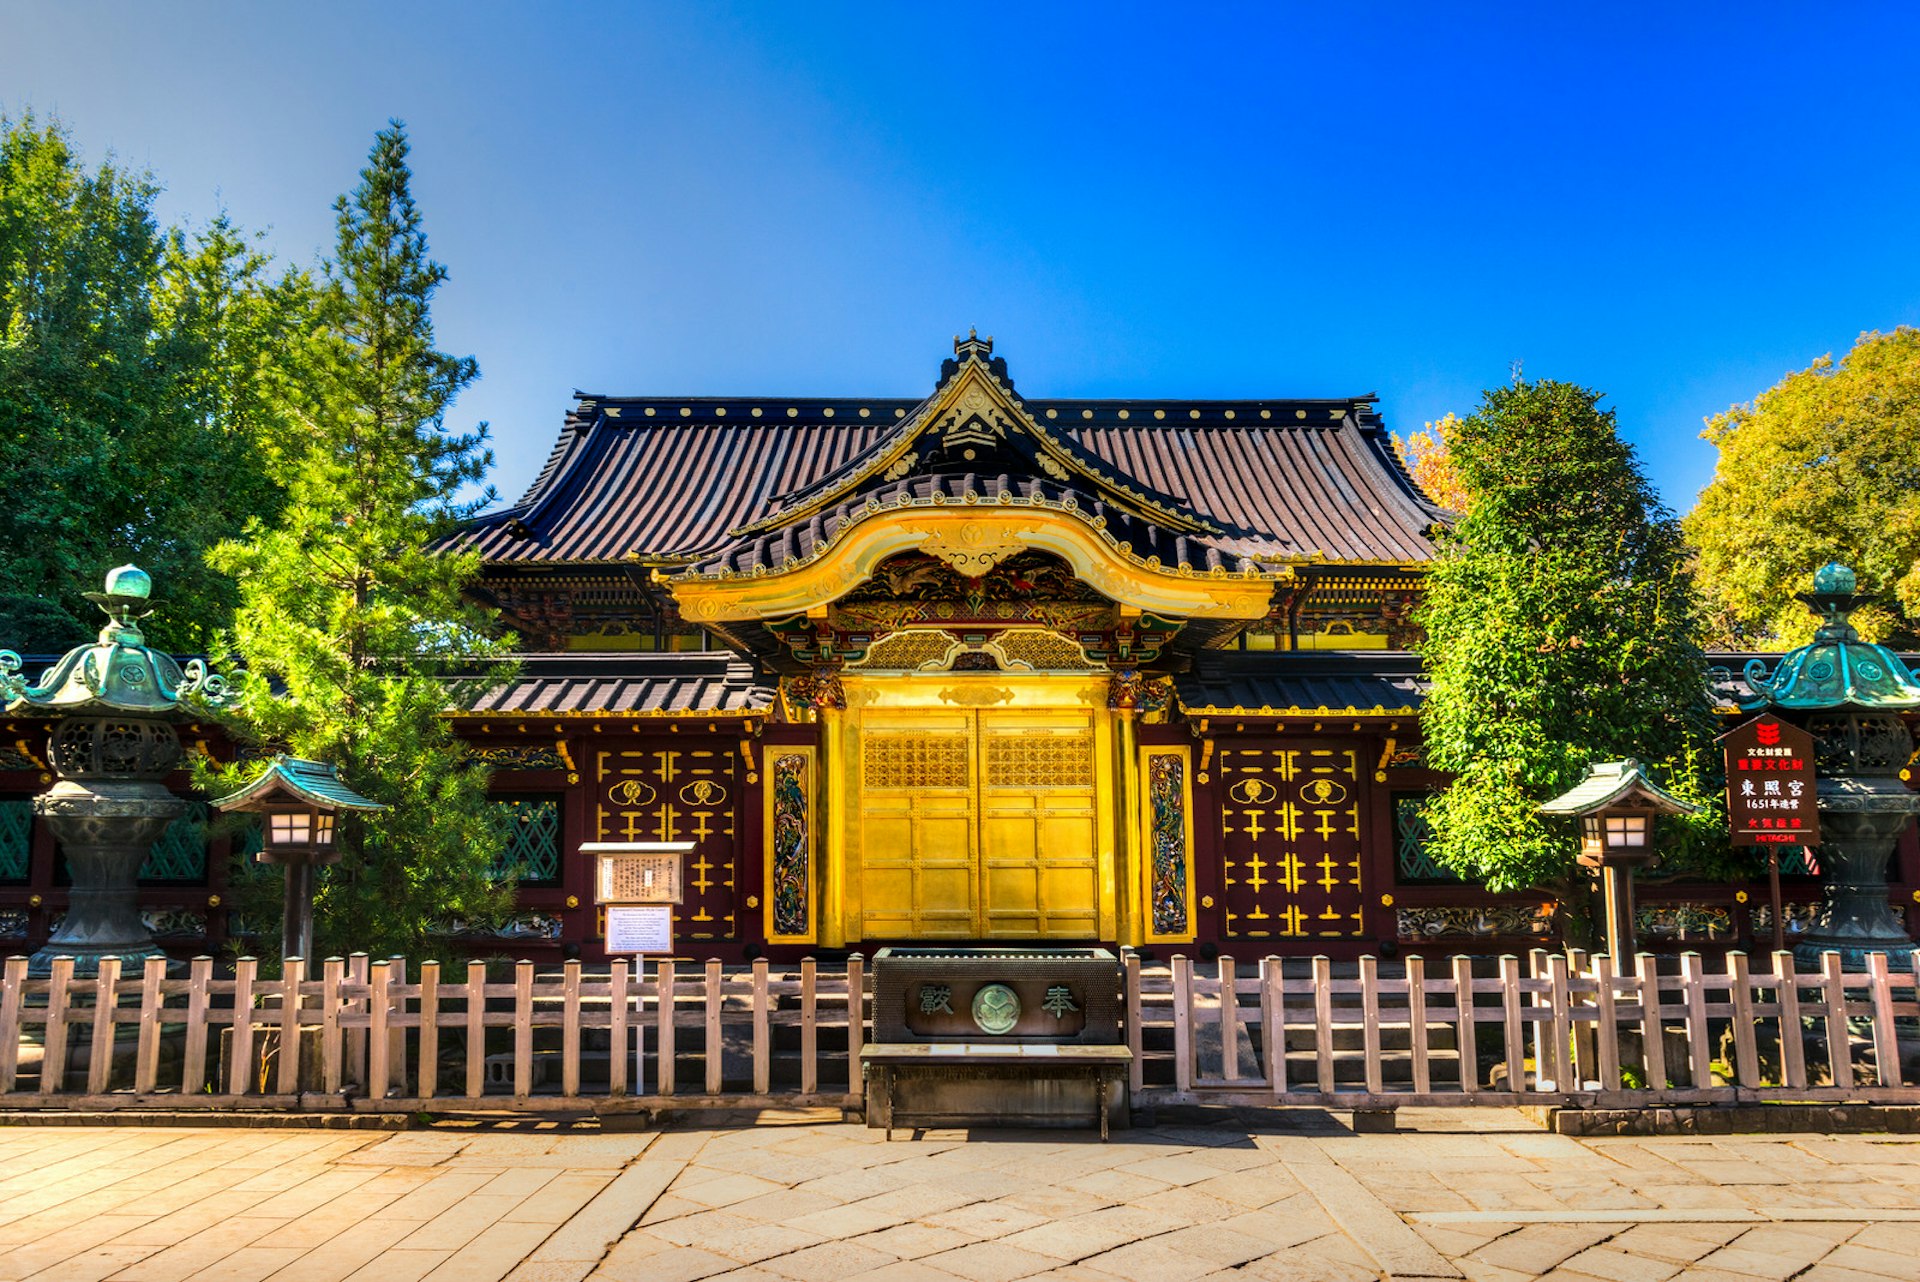 The gilded shrine of Ueno Tōshō-gū, a small, ornate Japanese shrine that's brown in colour with a magnificent gold door